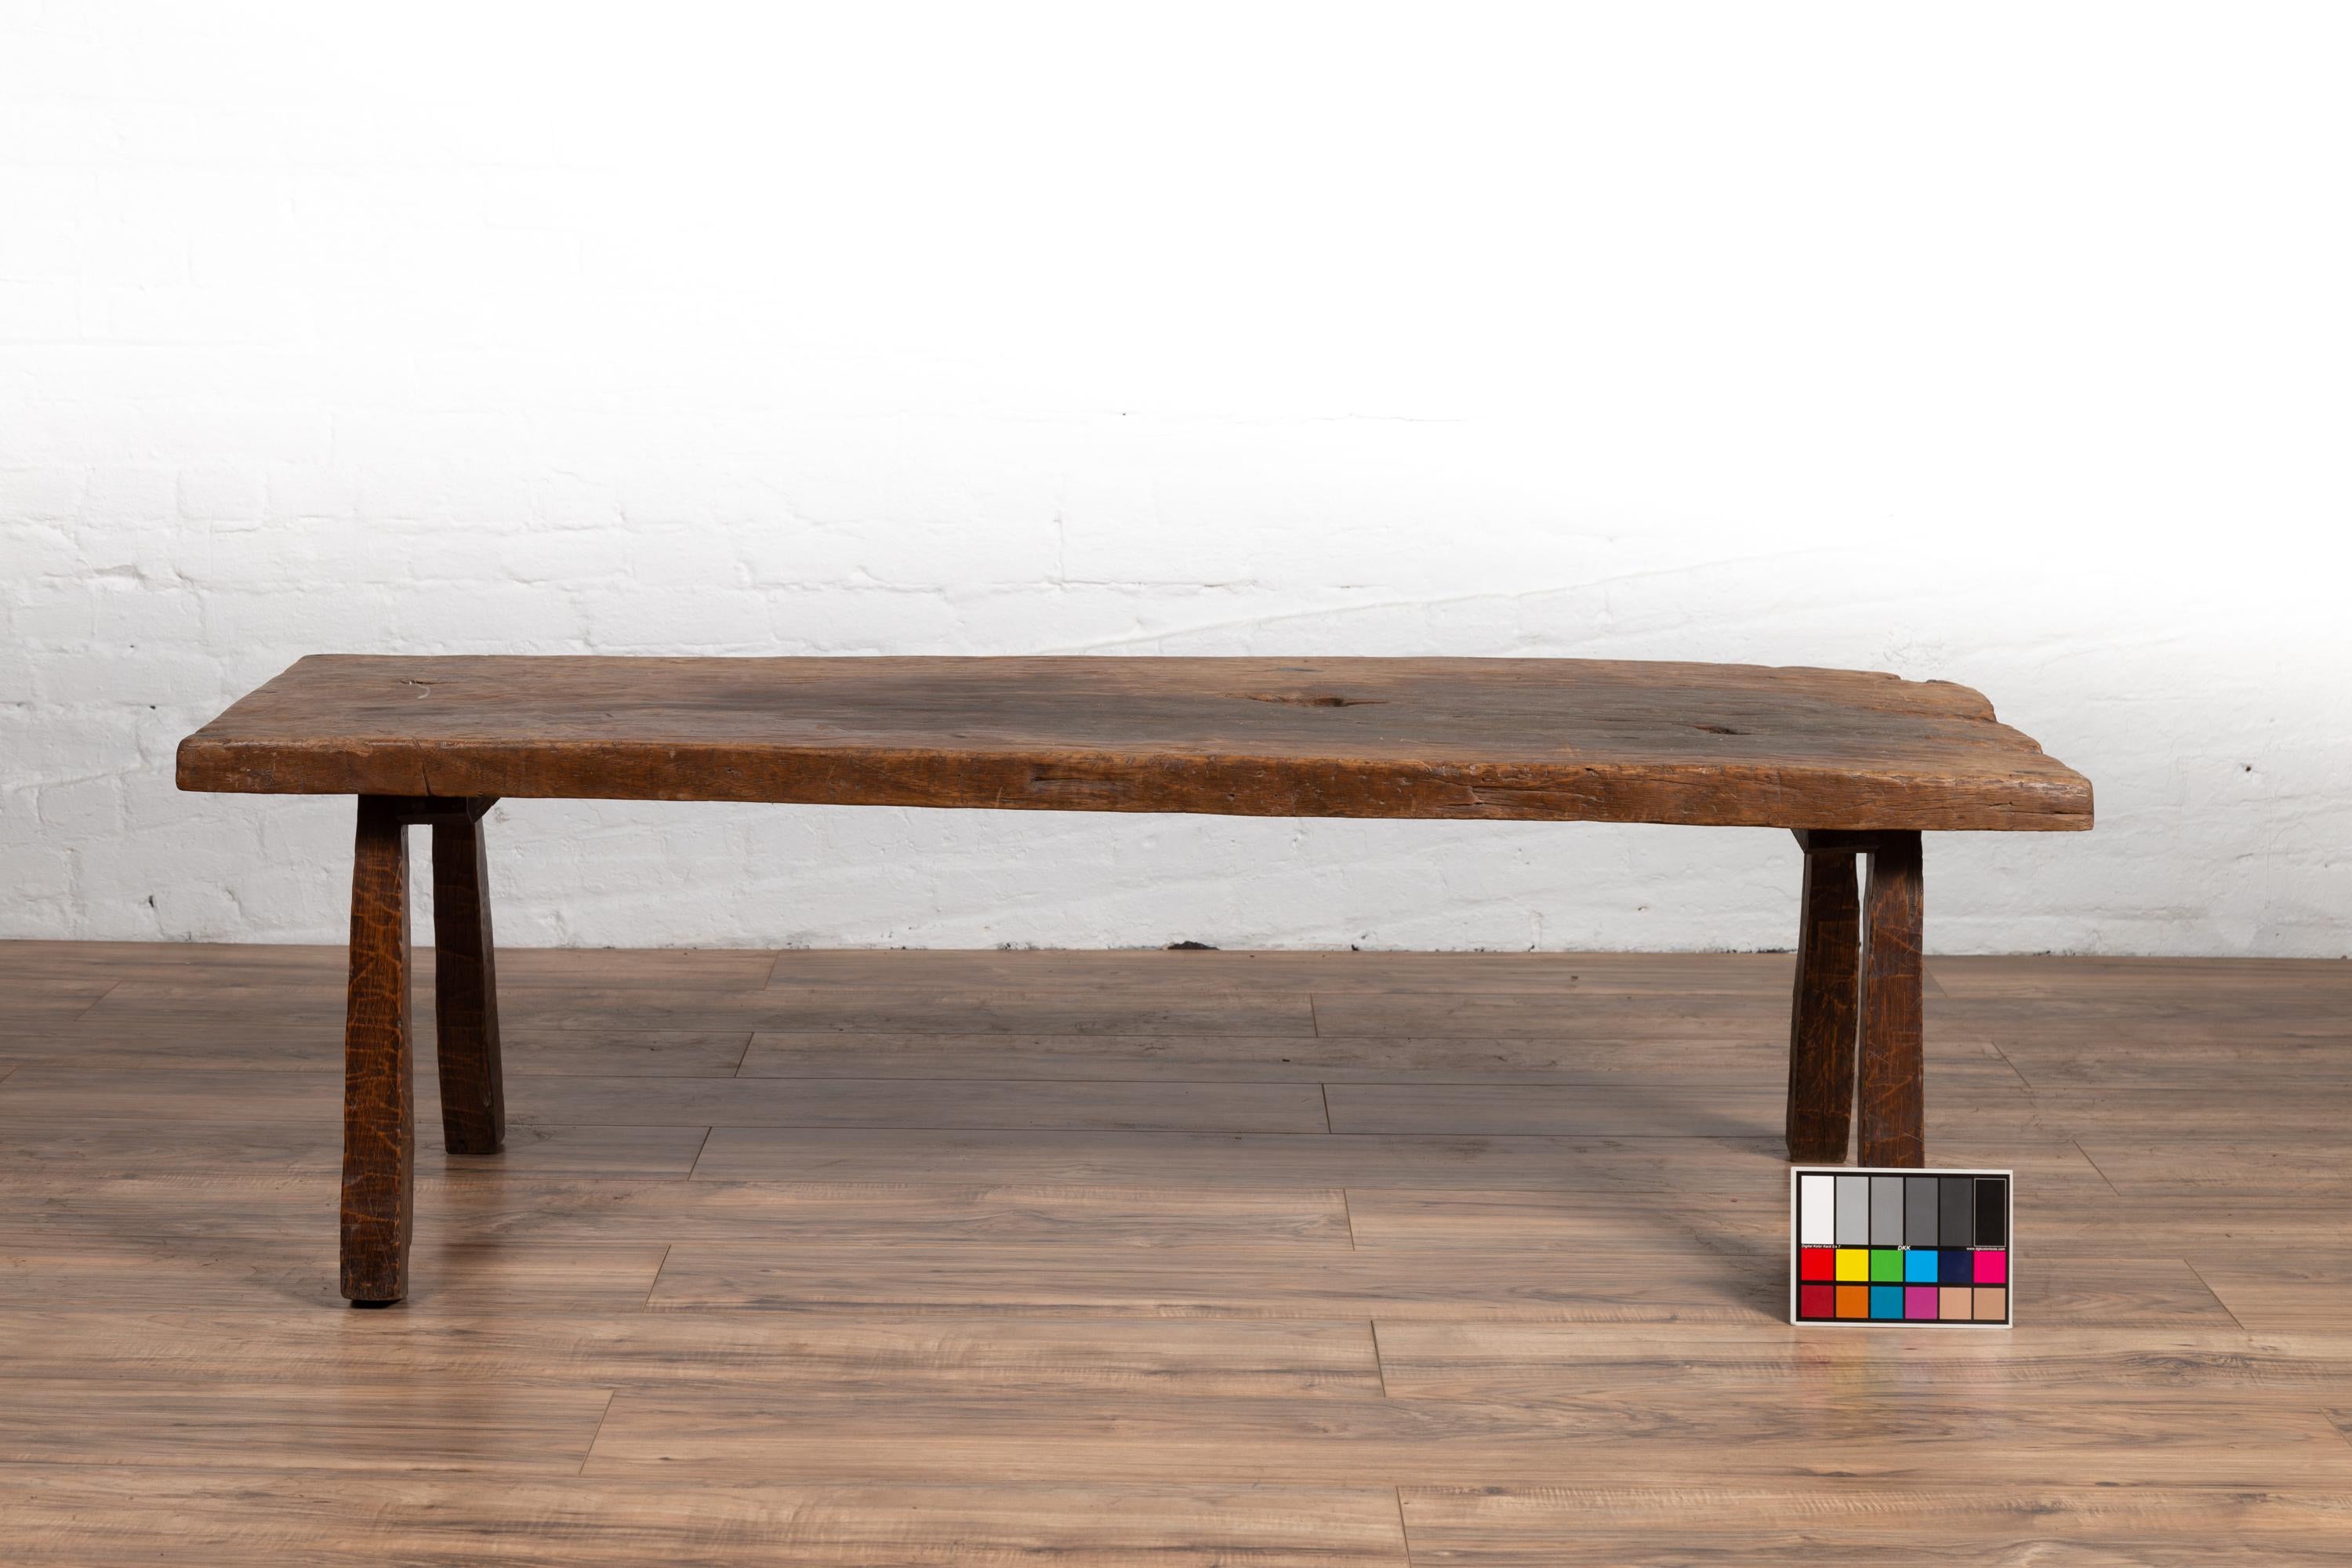 Rustic Indonesian Antique Wooden Bench with Weathered Appearance 5